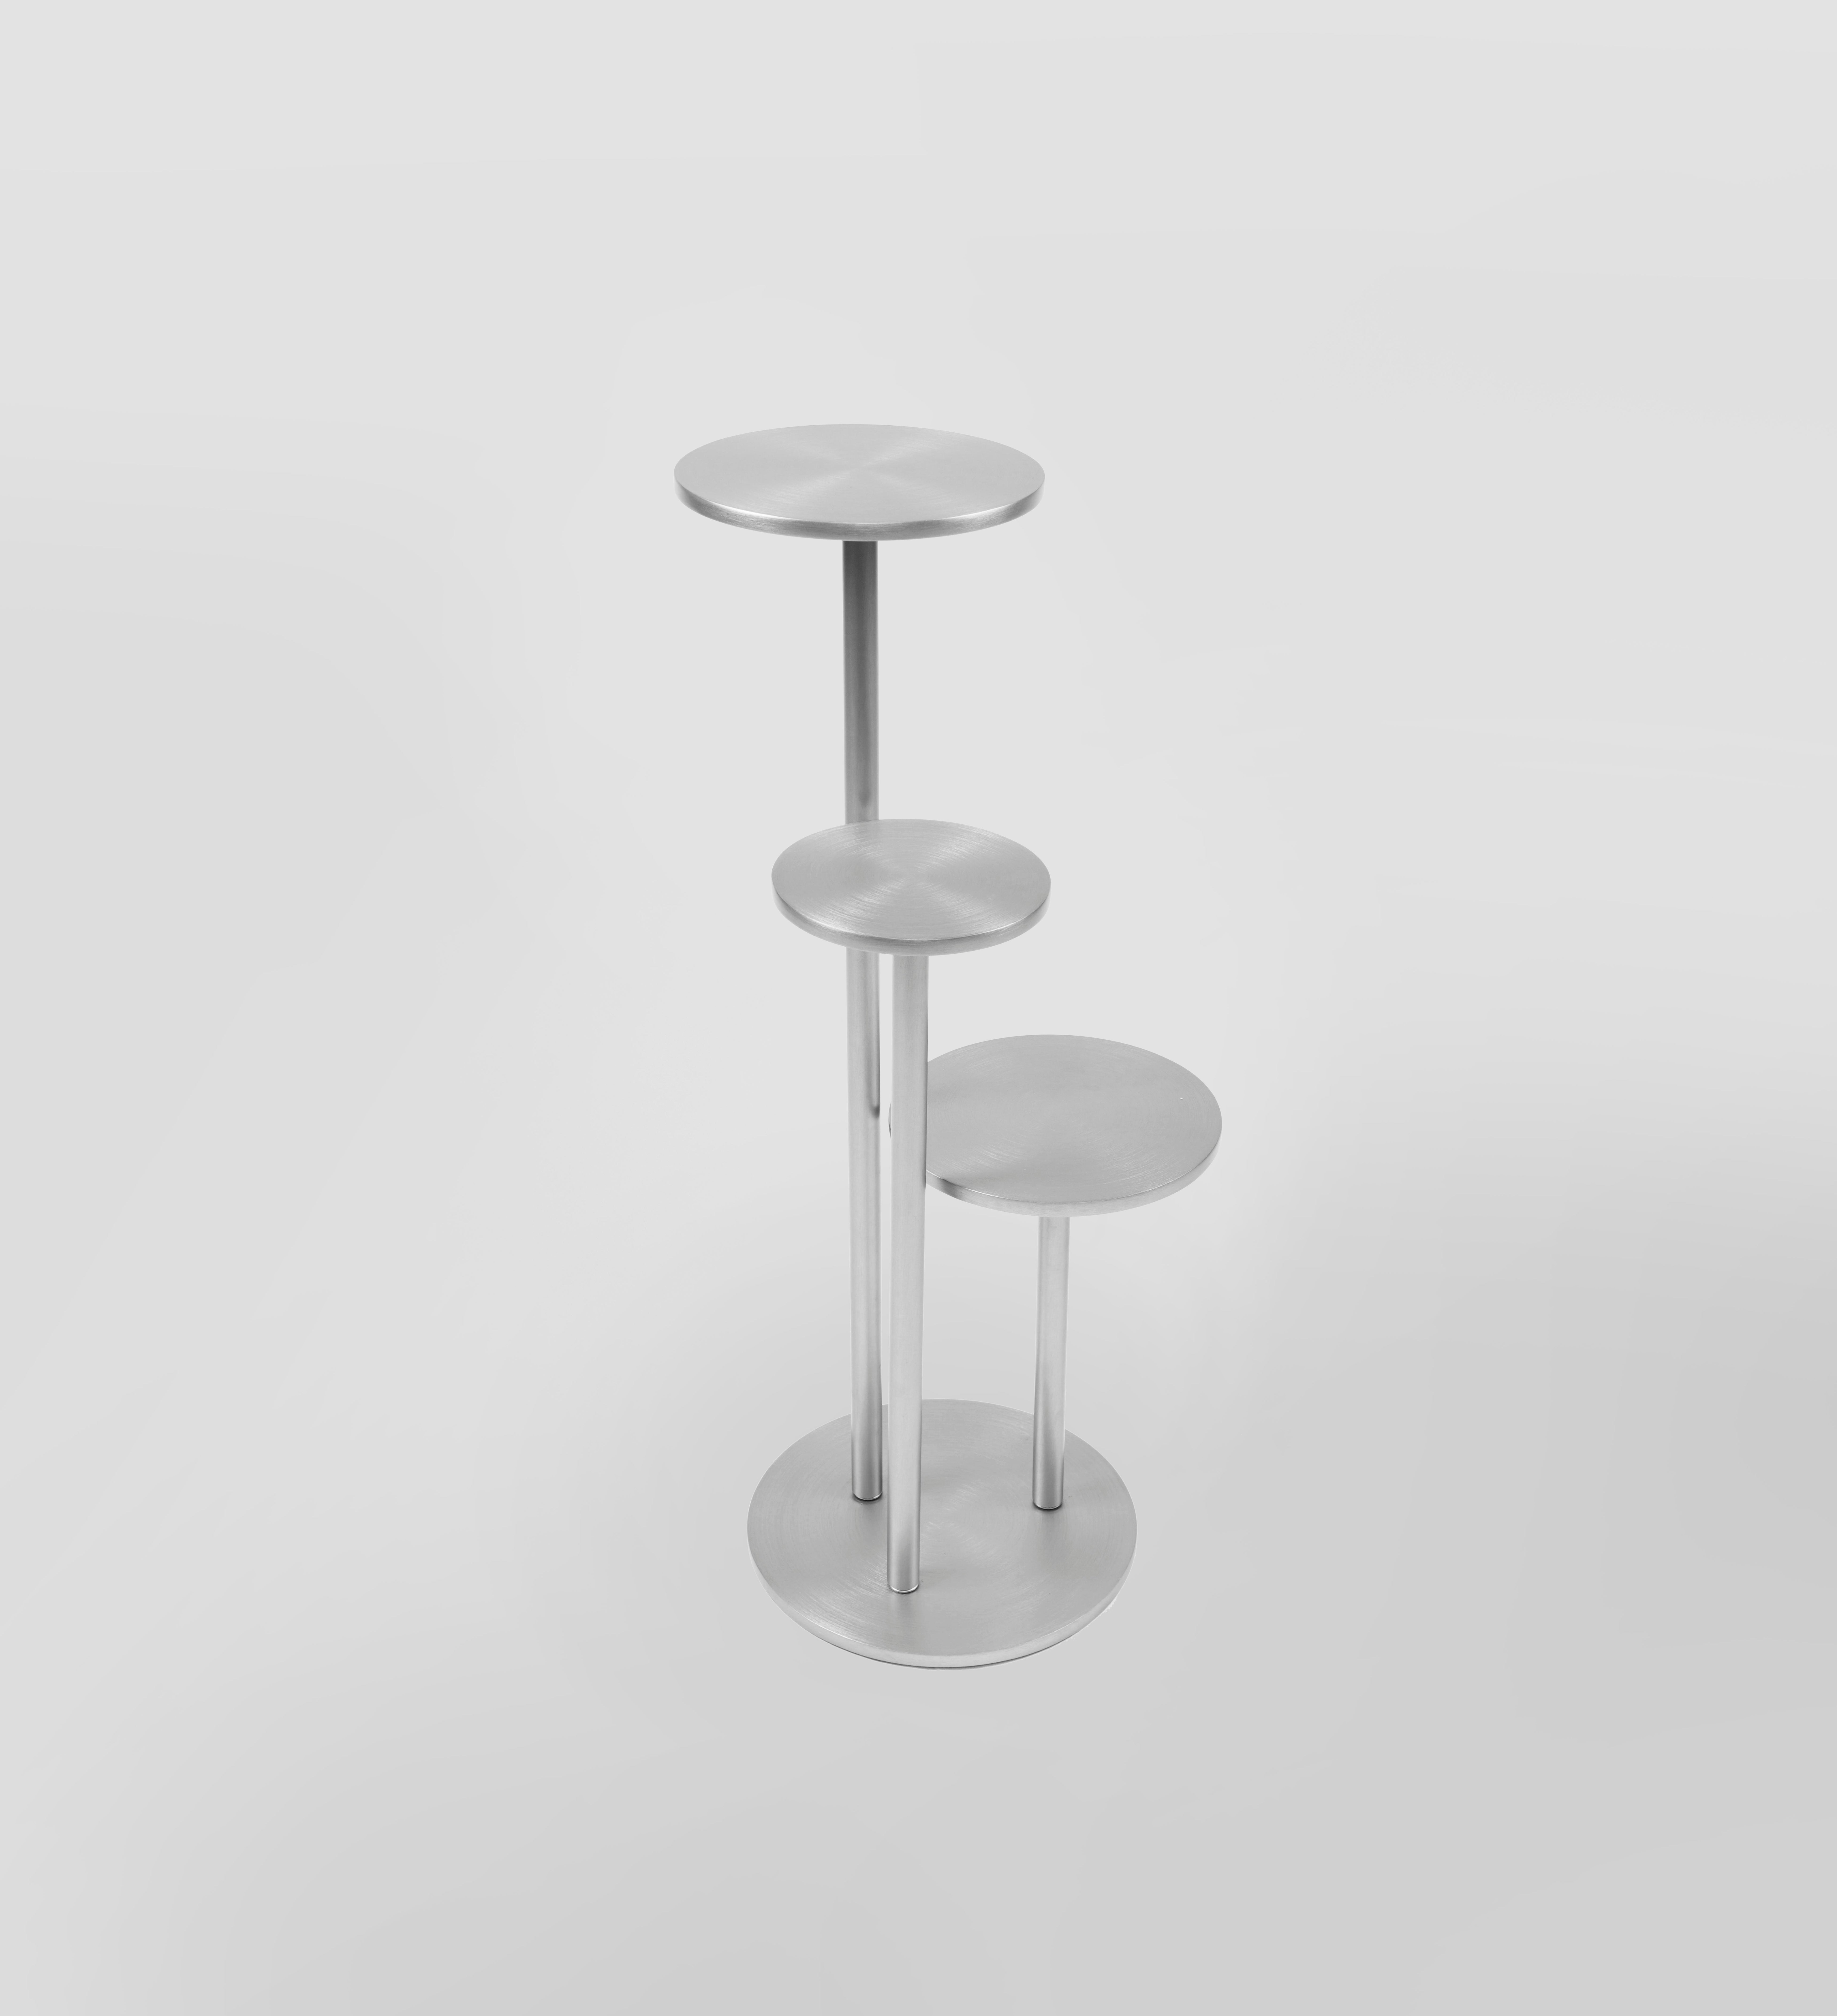 The 3 kings of Orion’s belt, offering 3 different heights and sizes of brushed metal disc, the combination of which provides a practical and sculptural side table. Orion is available in a number of metal finishes including satin and polished